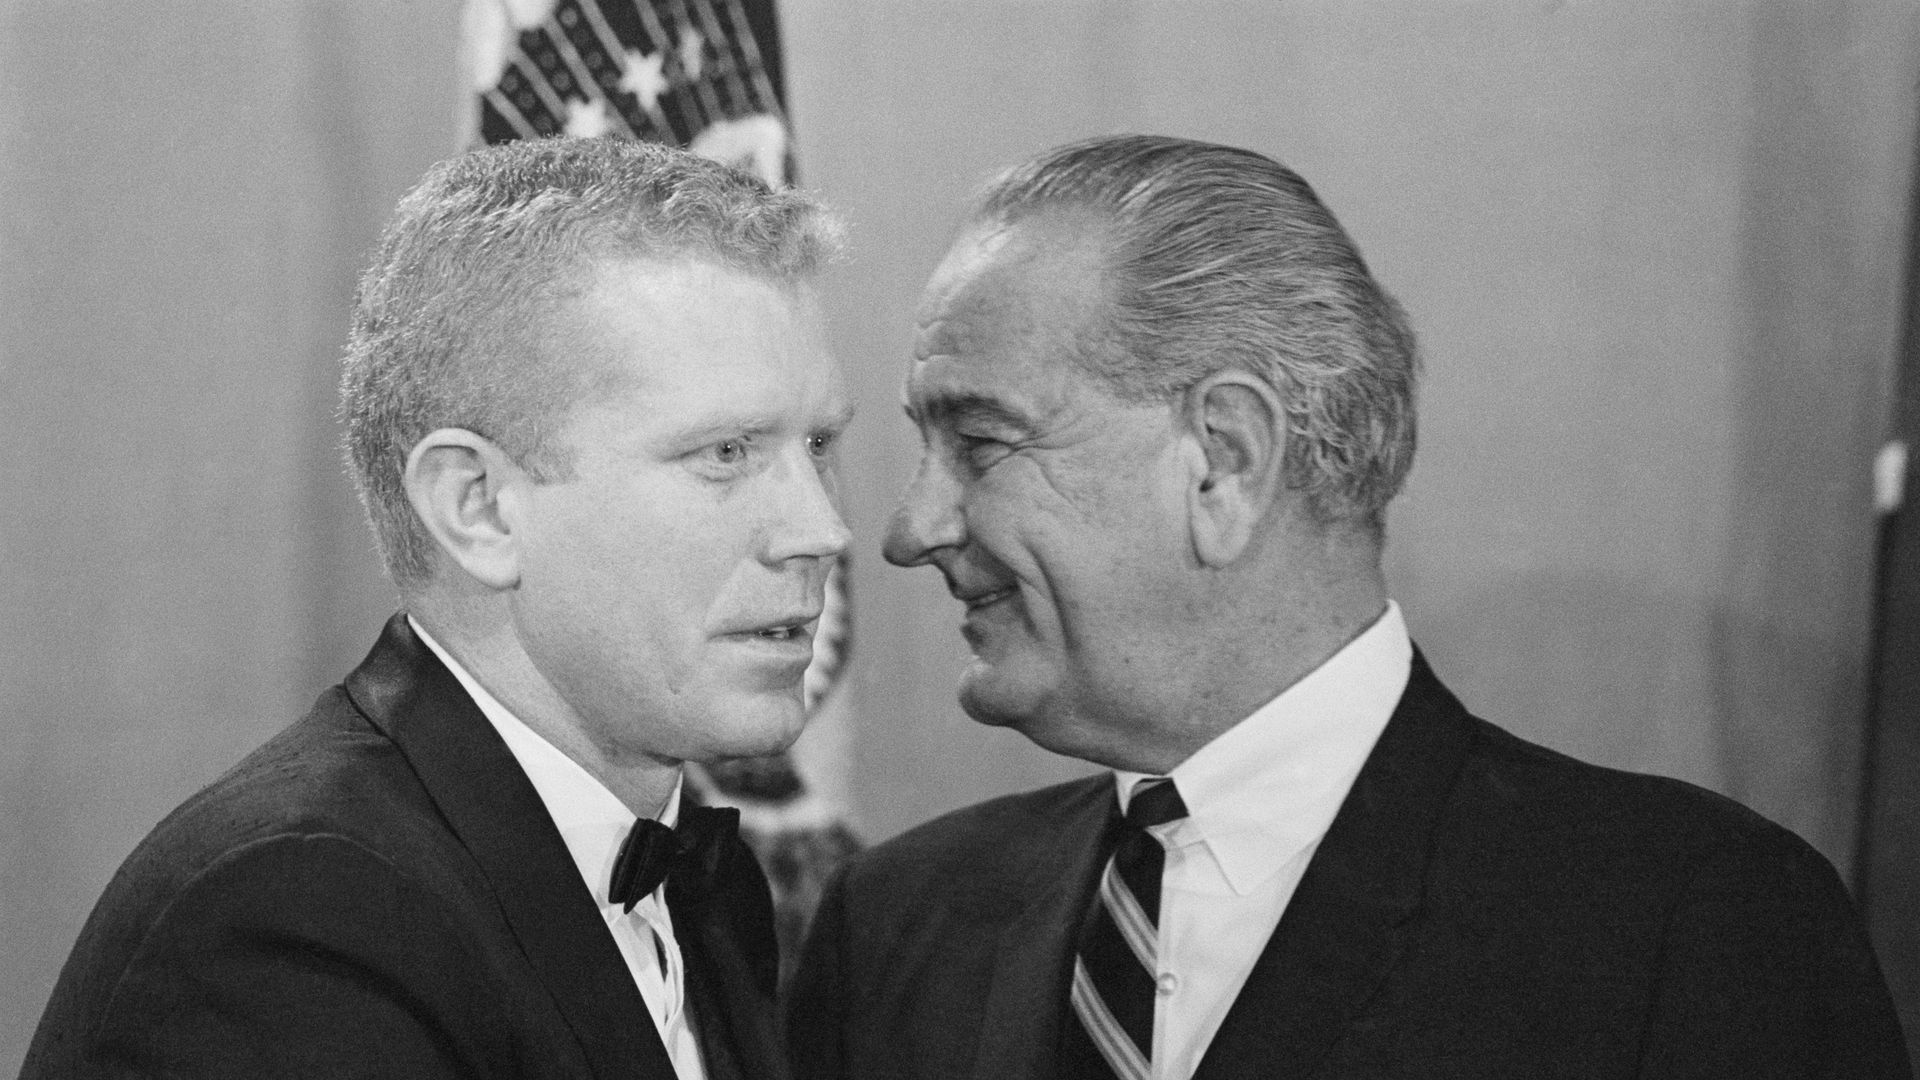 A black and white image of Ben Barnes and Lyndon Johnson talking closely